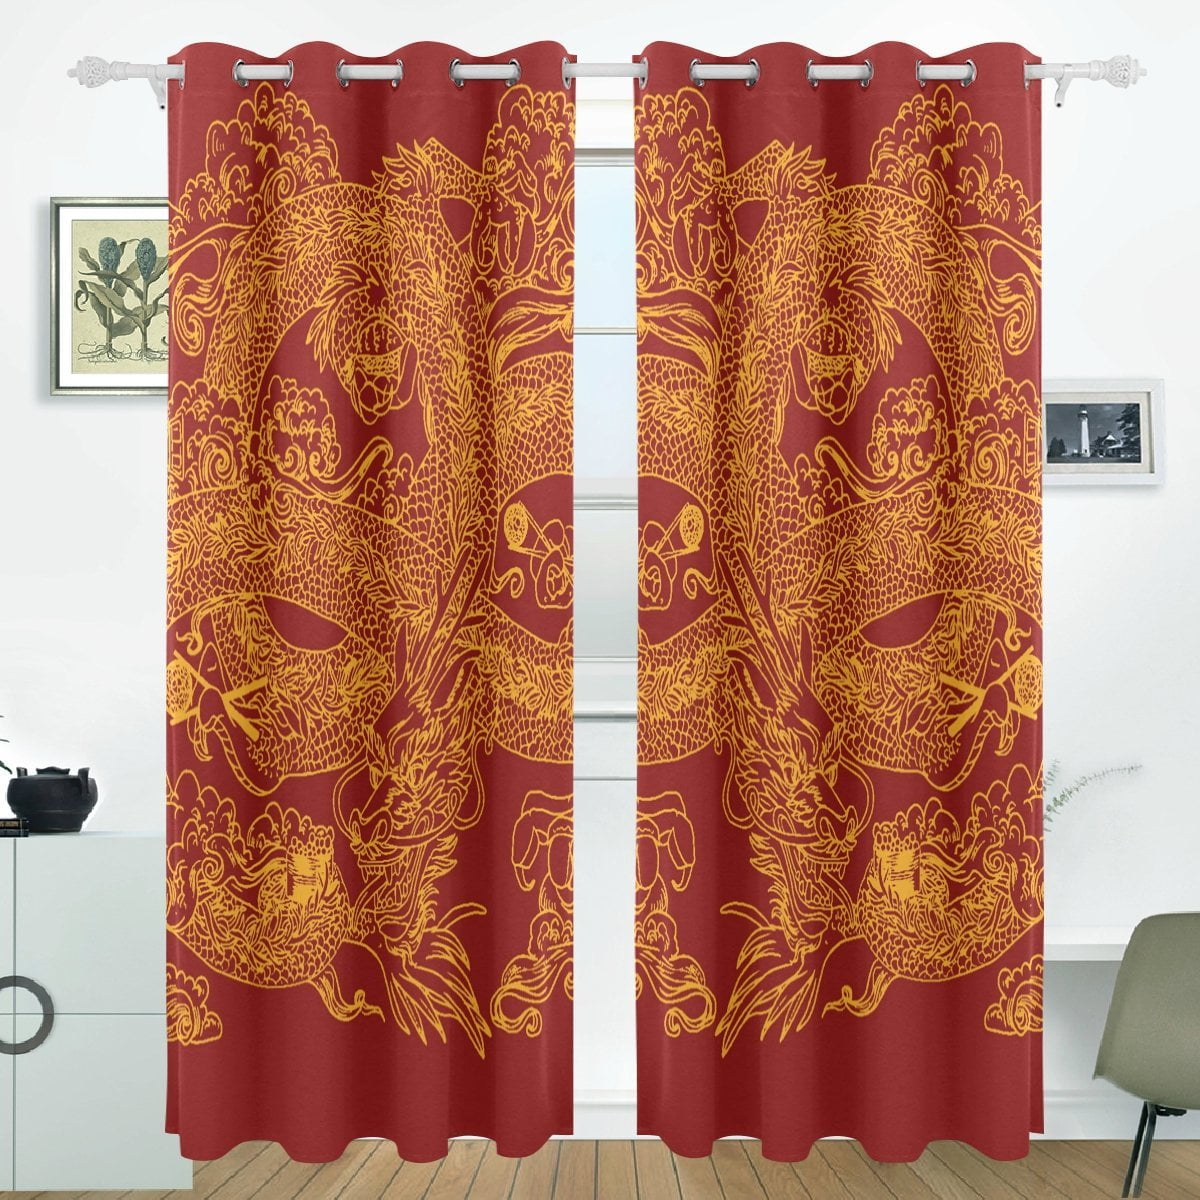 Dragon Curtains Historic Asian Creature Window Drapes 2 Panel Set 108x84 Inches 